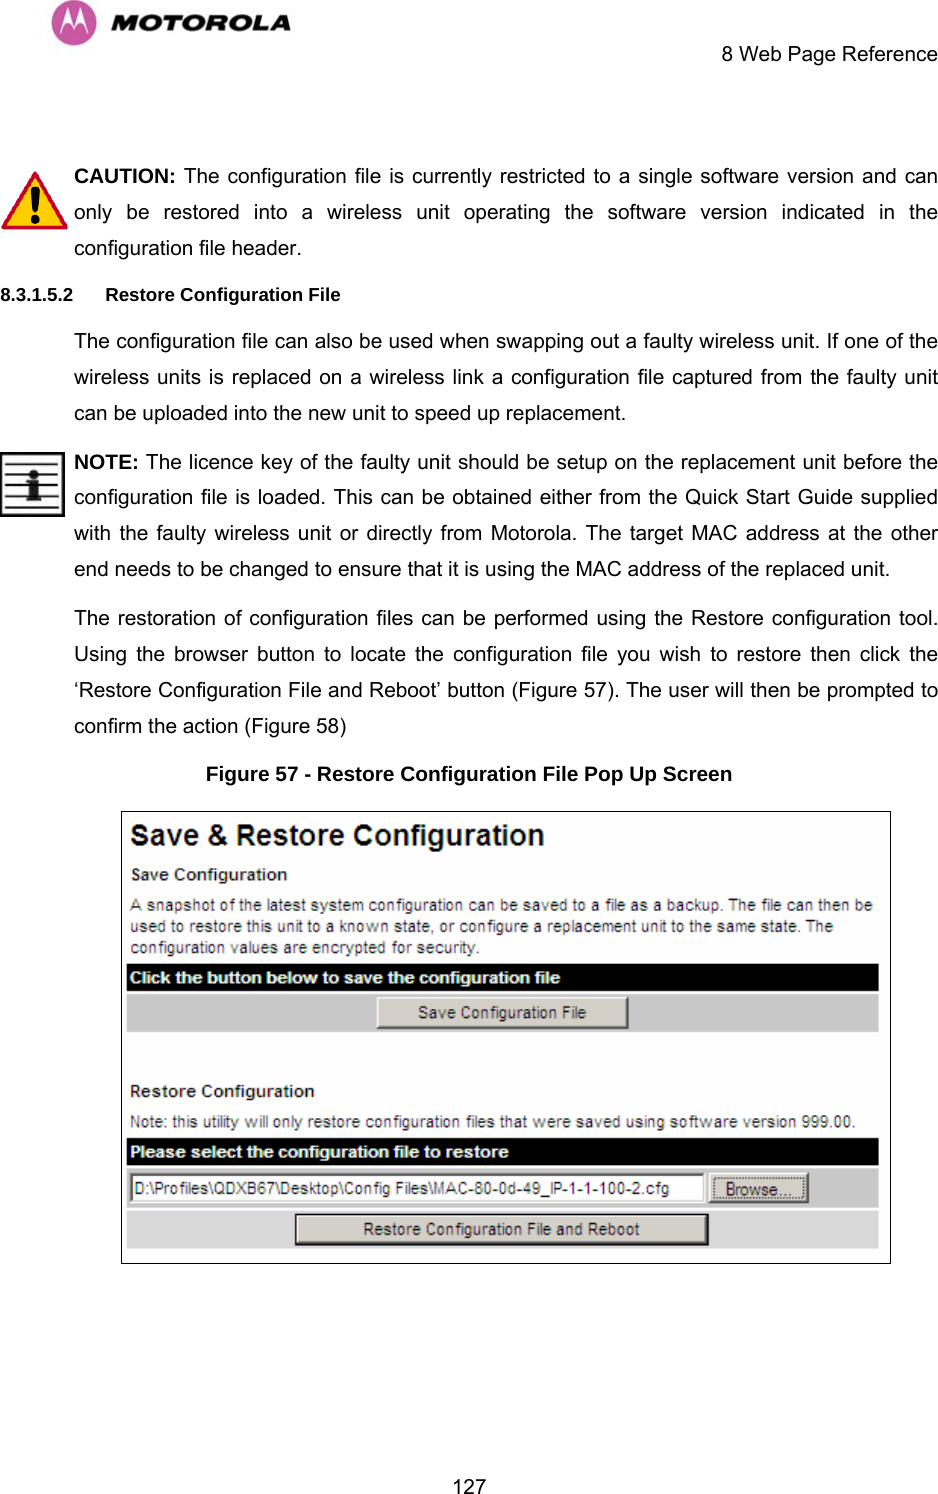     8 Web Page Reference  127 CAUTION: The configuration file is currently restricted to a single software version and can only be restored into a wireless unit operating the software version indicated in the configuration file header. 8.3.1.5.2  Restore Configuration File The configuration file can also be used when swapping out a faulty wireless unit. If one of the wireless units is replaced on a wireless link a configuration file captured from the faulty unit can be uploaded into the new unit to speed up replacement.  NOTE: The licence key of the faulty unit should be setup on the replacement unit before the configuration file is loaded. This can be obtained either from the Quick Start Guide supplied with the faulty wireless unit or directly from Motorola. The target MAC address at the other end needs to be changed to ensure that it is using the MAC address of the replaced unit. The restoration of configuration files can be performed using the Restore configuration tool. Using the browser button to locate the configuration file you wish to restore then click the ‘Restore Configuration File and Reboot’ button (Figure 57). The user will then be prompted to confirm the action (Figure 58) Figure 57 - Restore Configuration File Pop Up Screen  